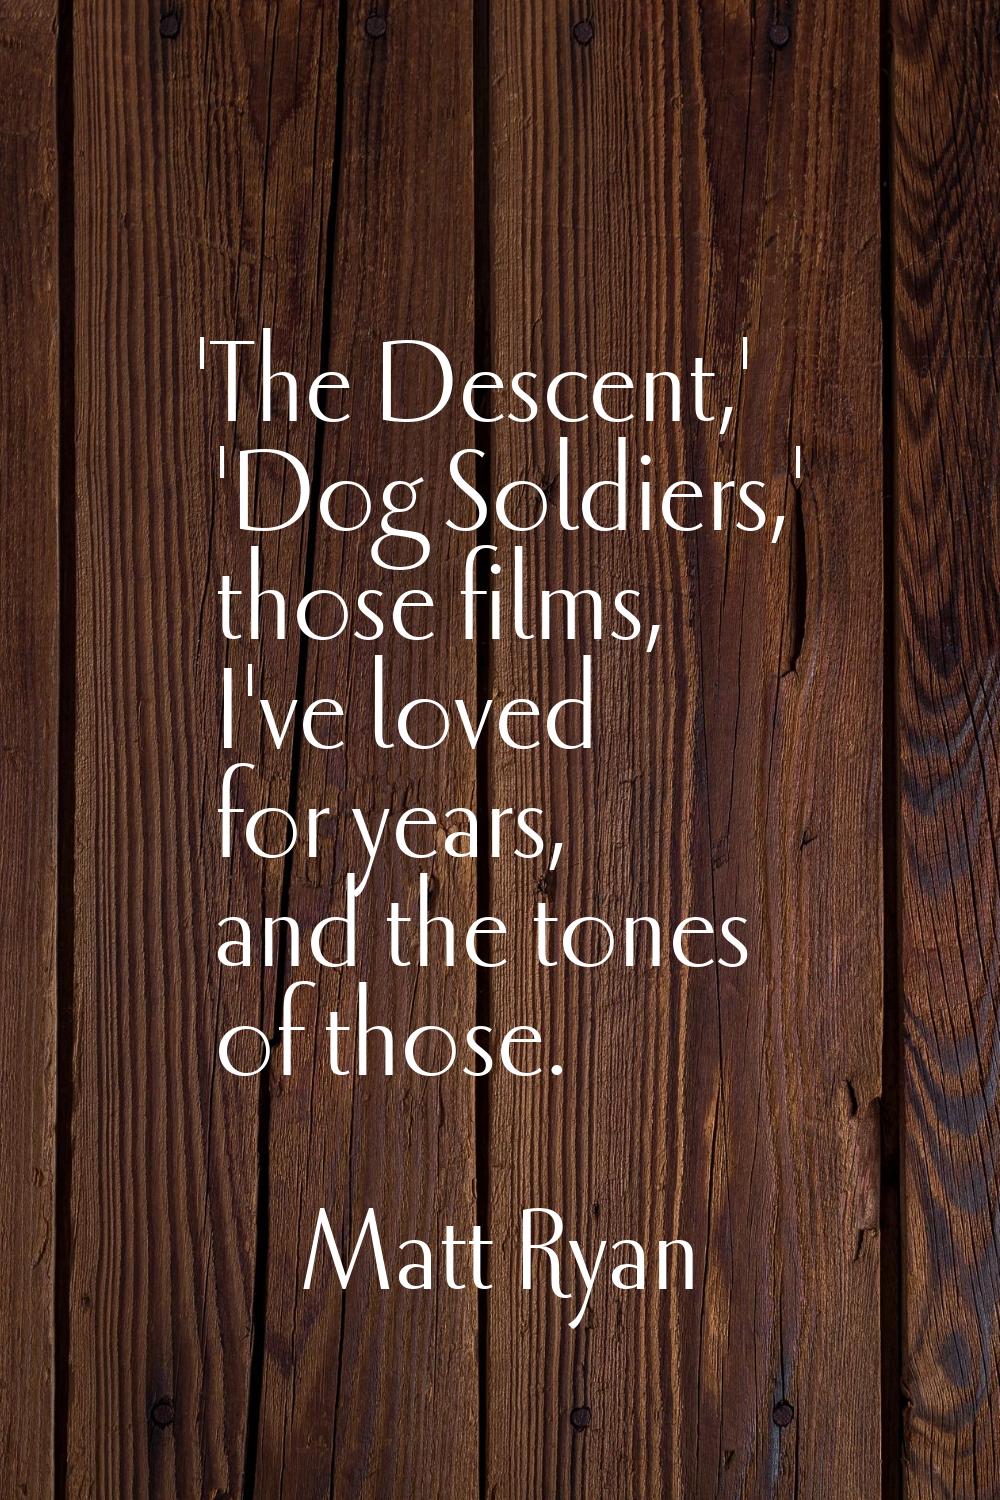 'The Descent,' 'Dog Soldiers,' those films, I've loved for years, and the tones of those.